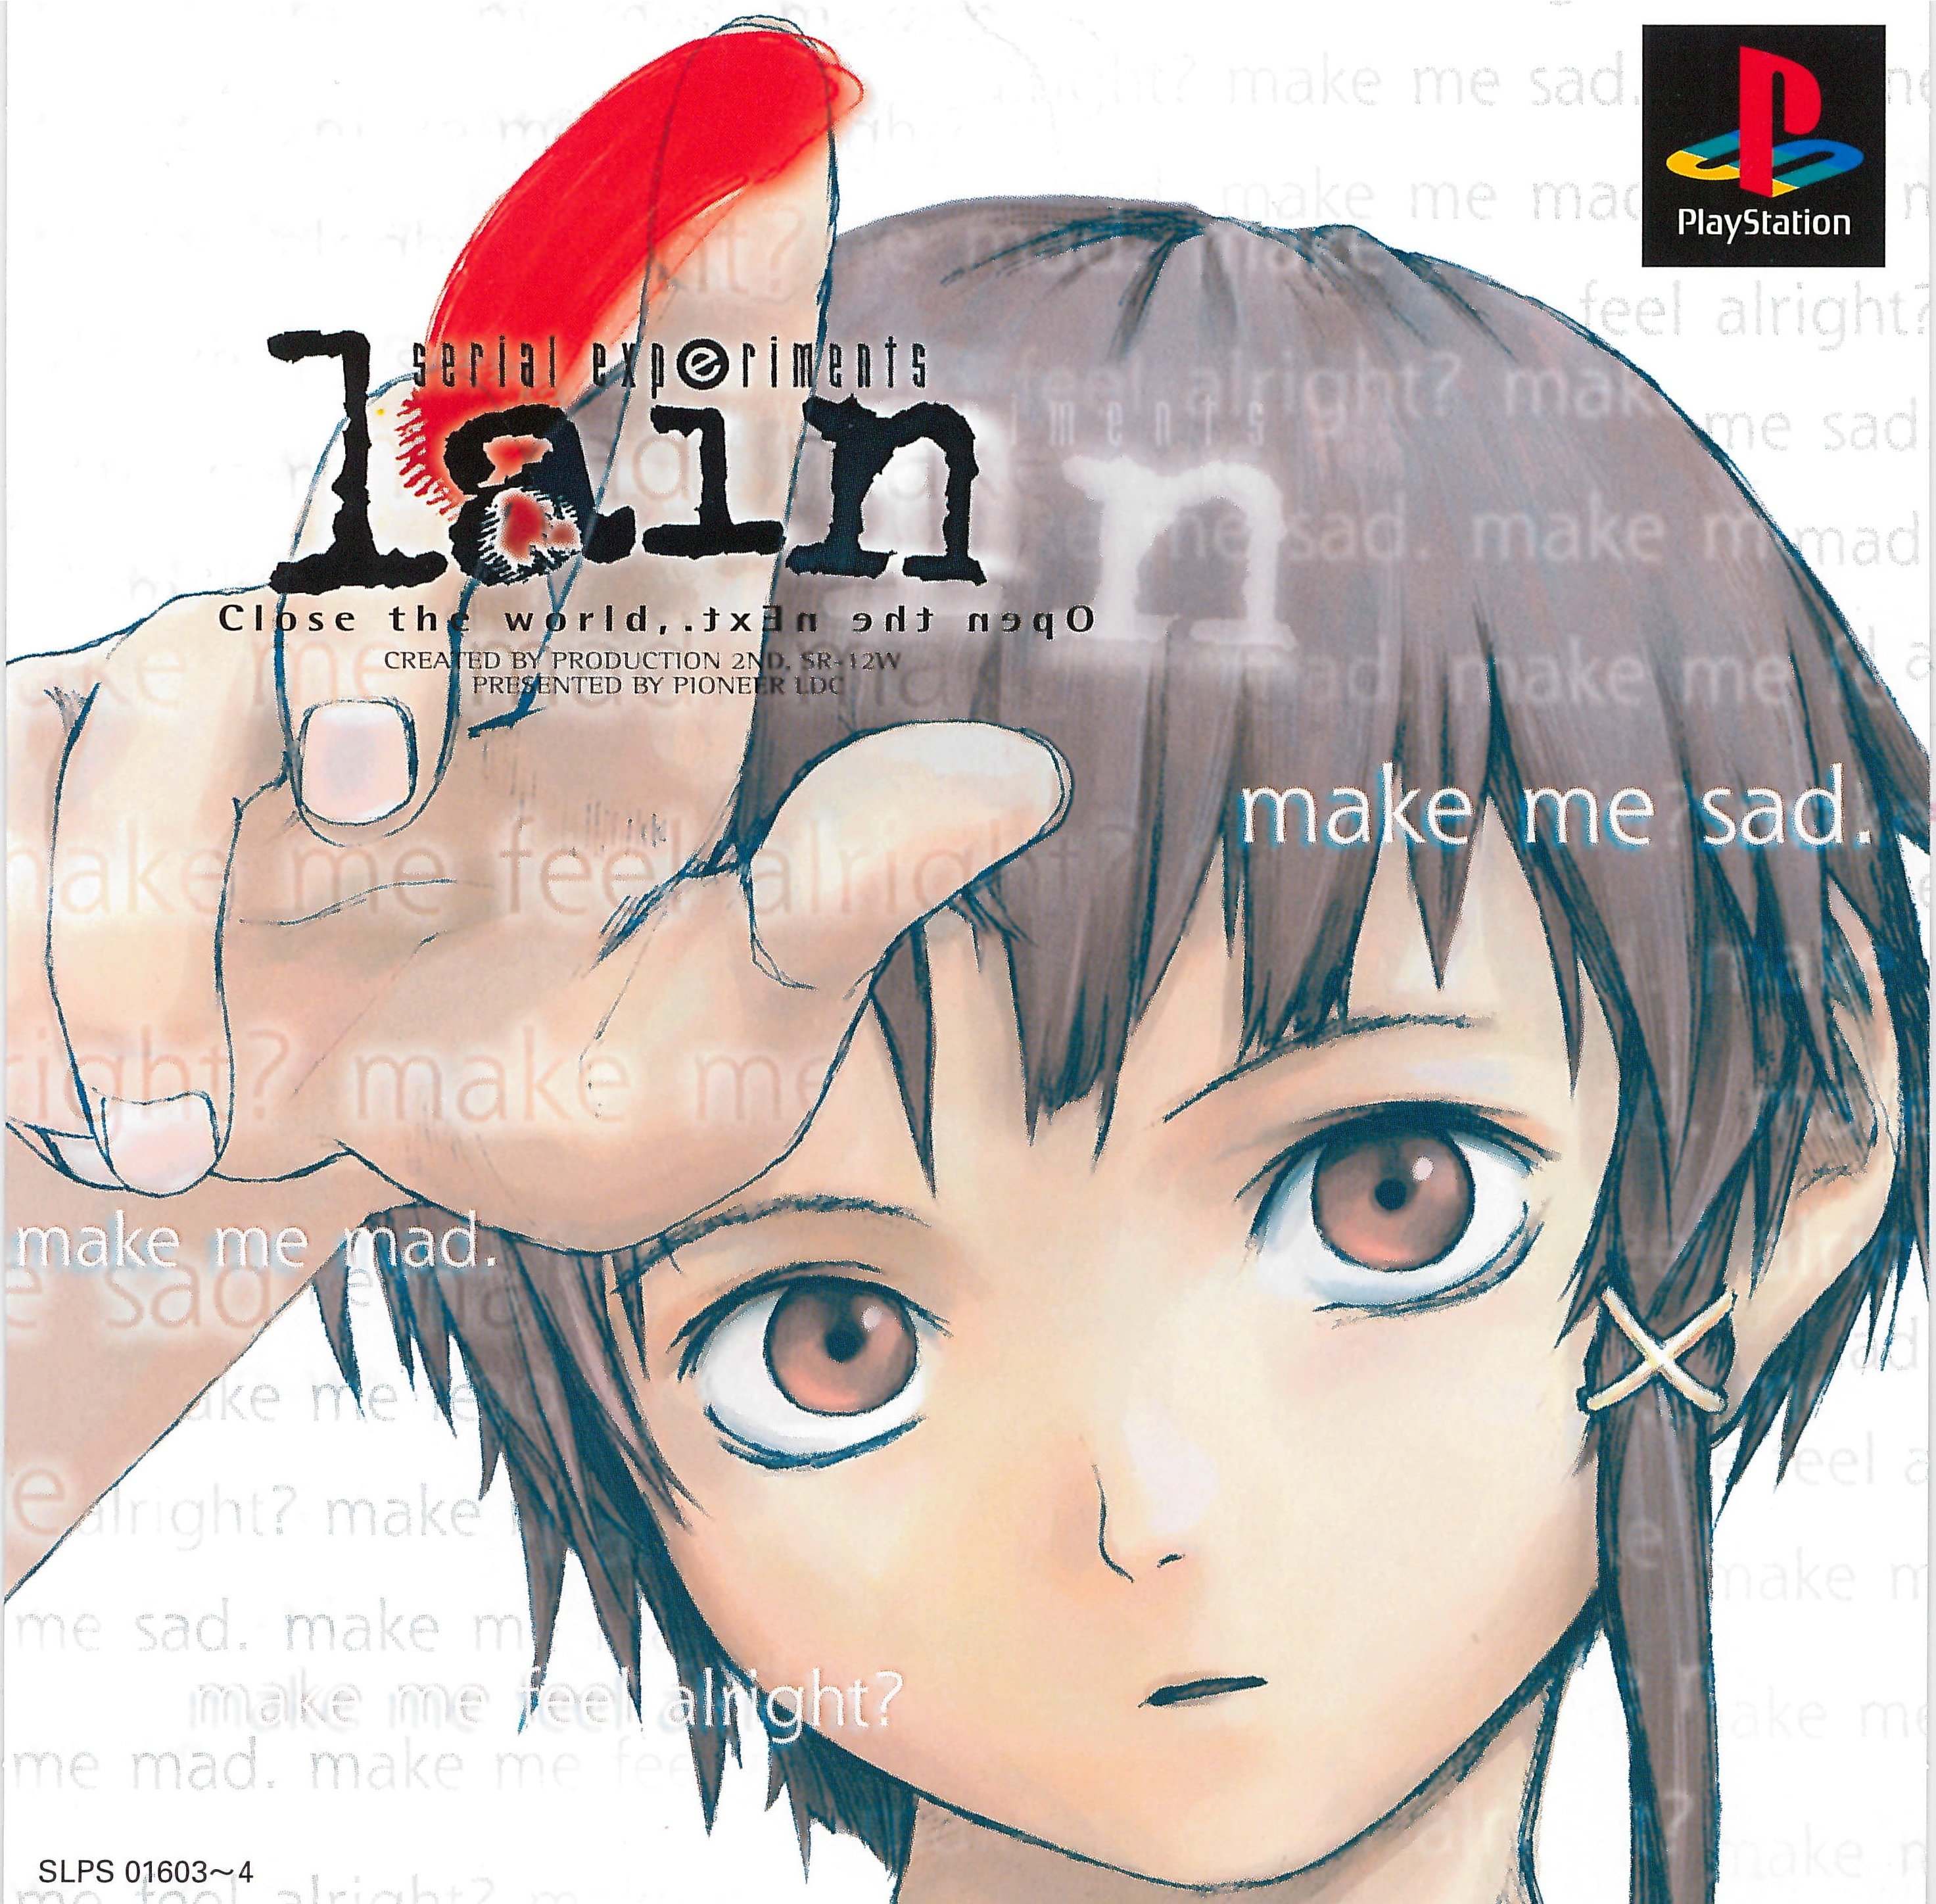 Serial Experiments Lain (video game) | Serial Experiments Lain 